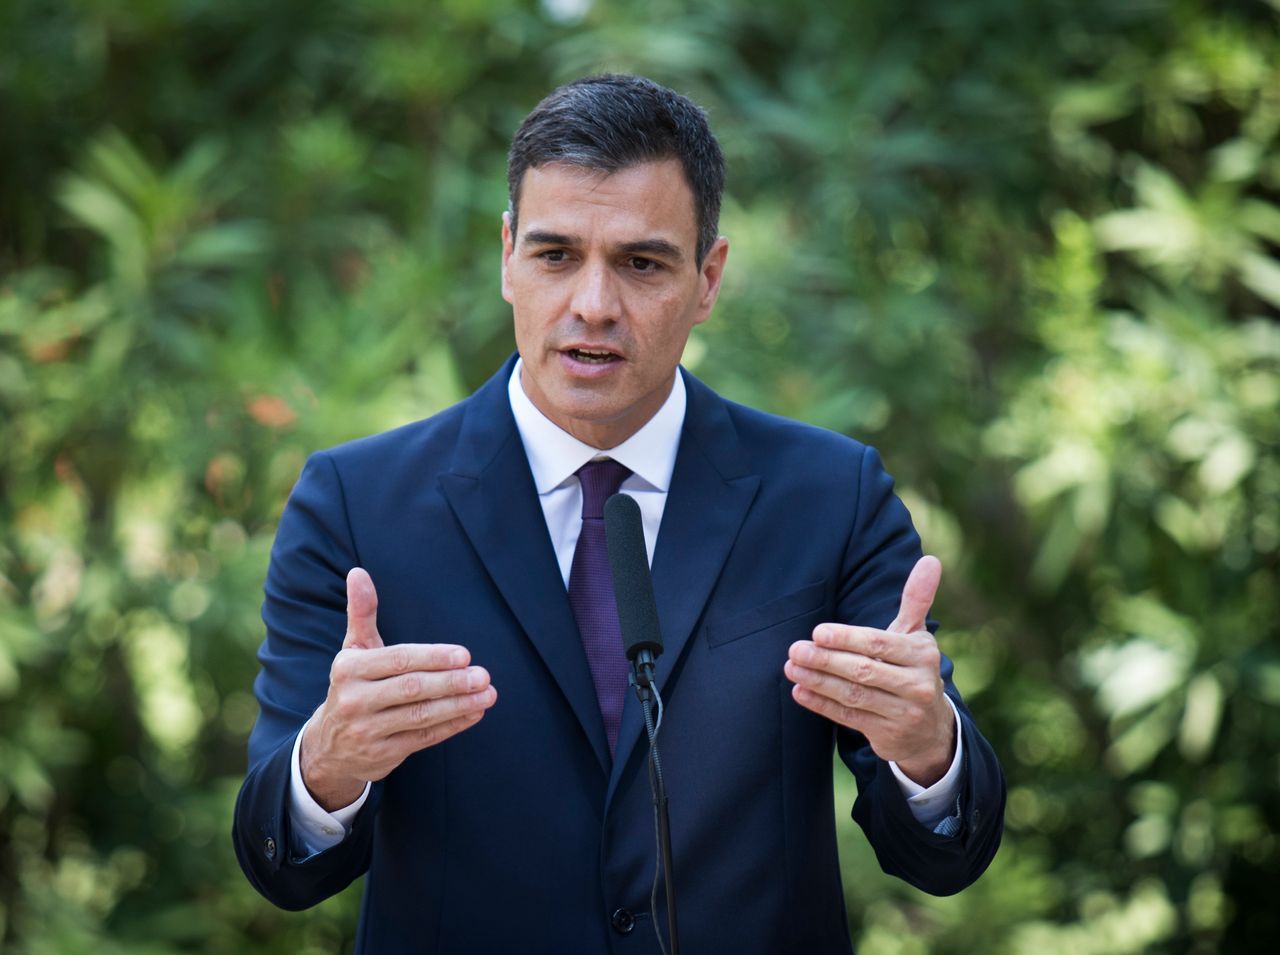 Spanish Prime Minister Pedro Sanchez used a loophole to approve the exhumation of Franco.